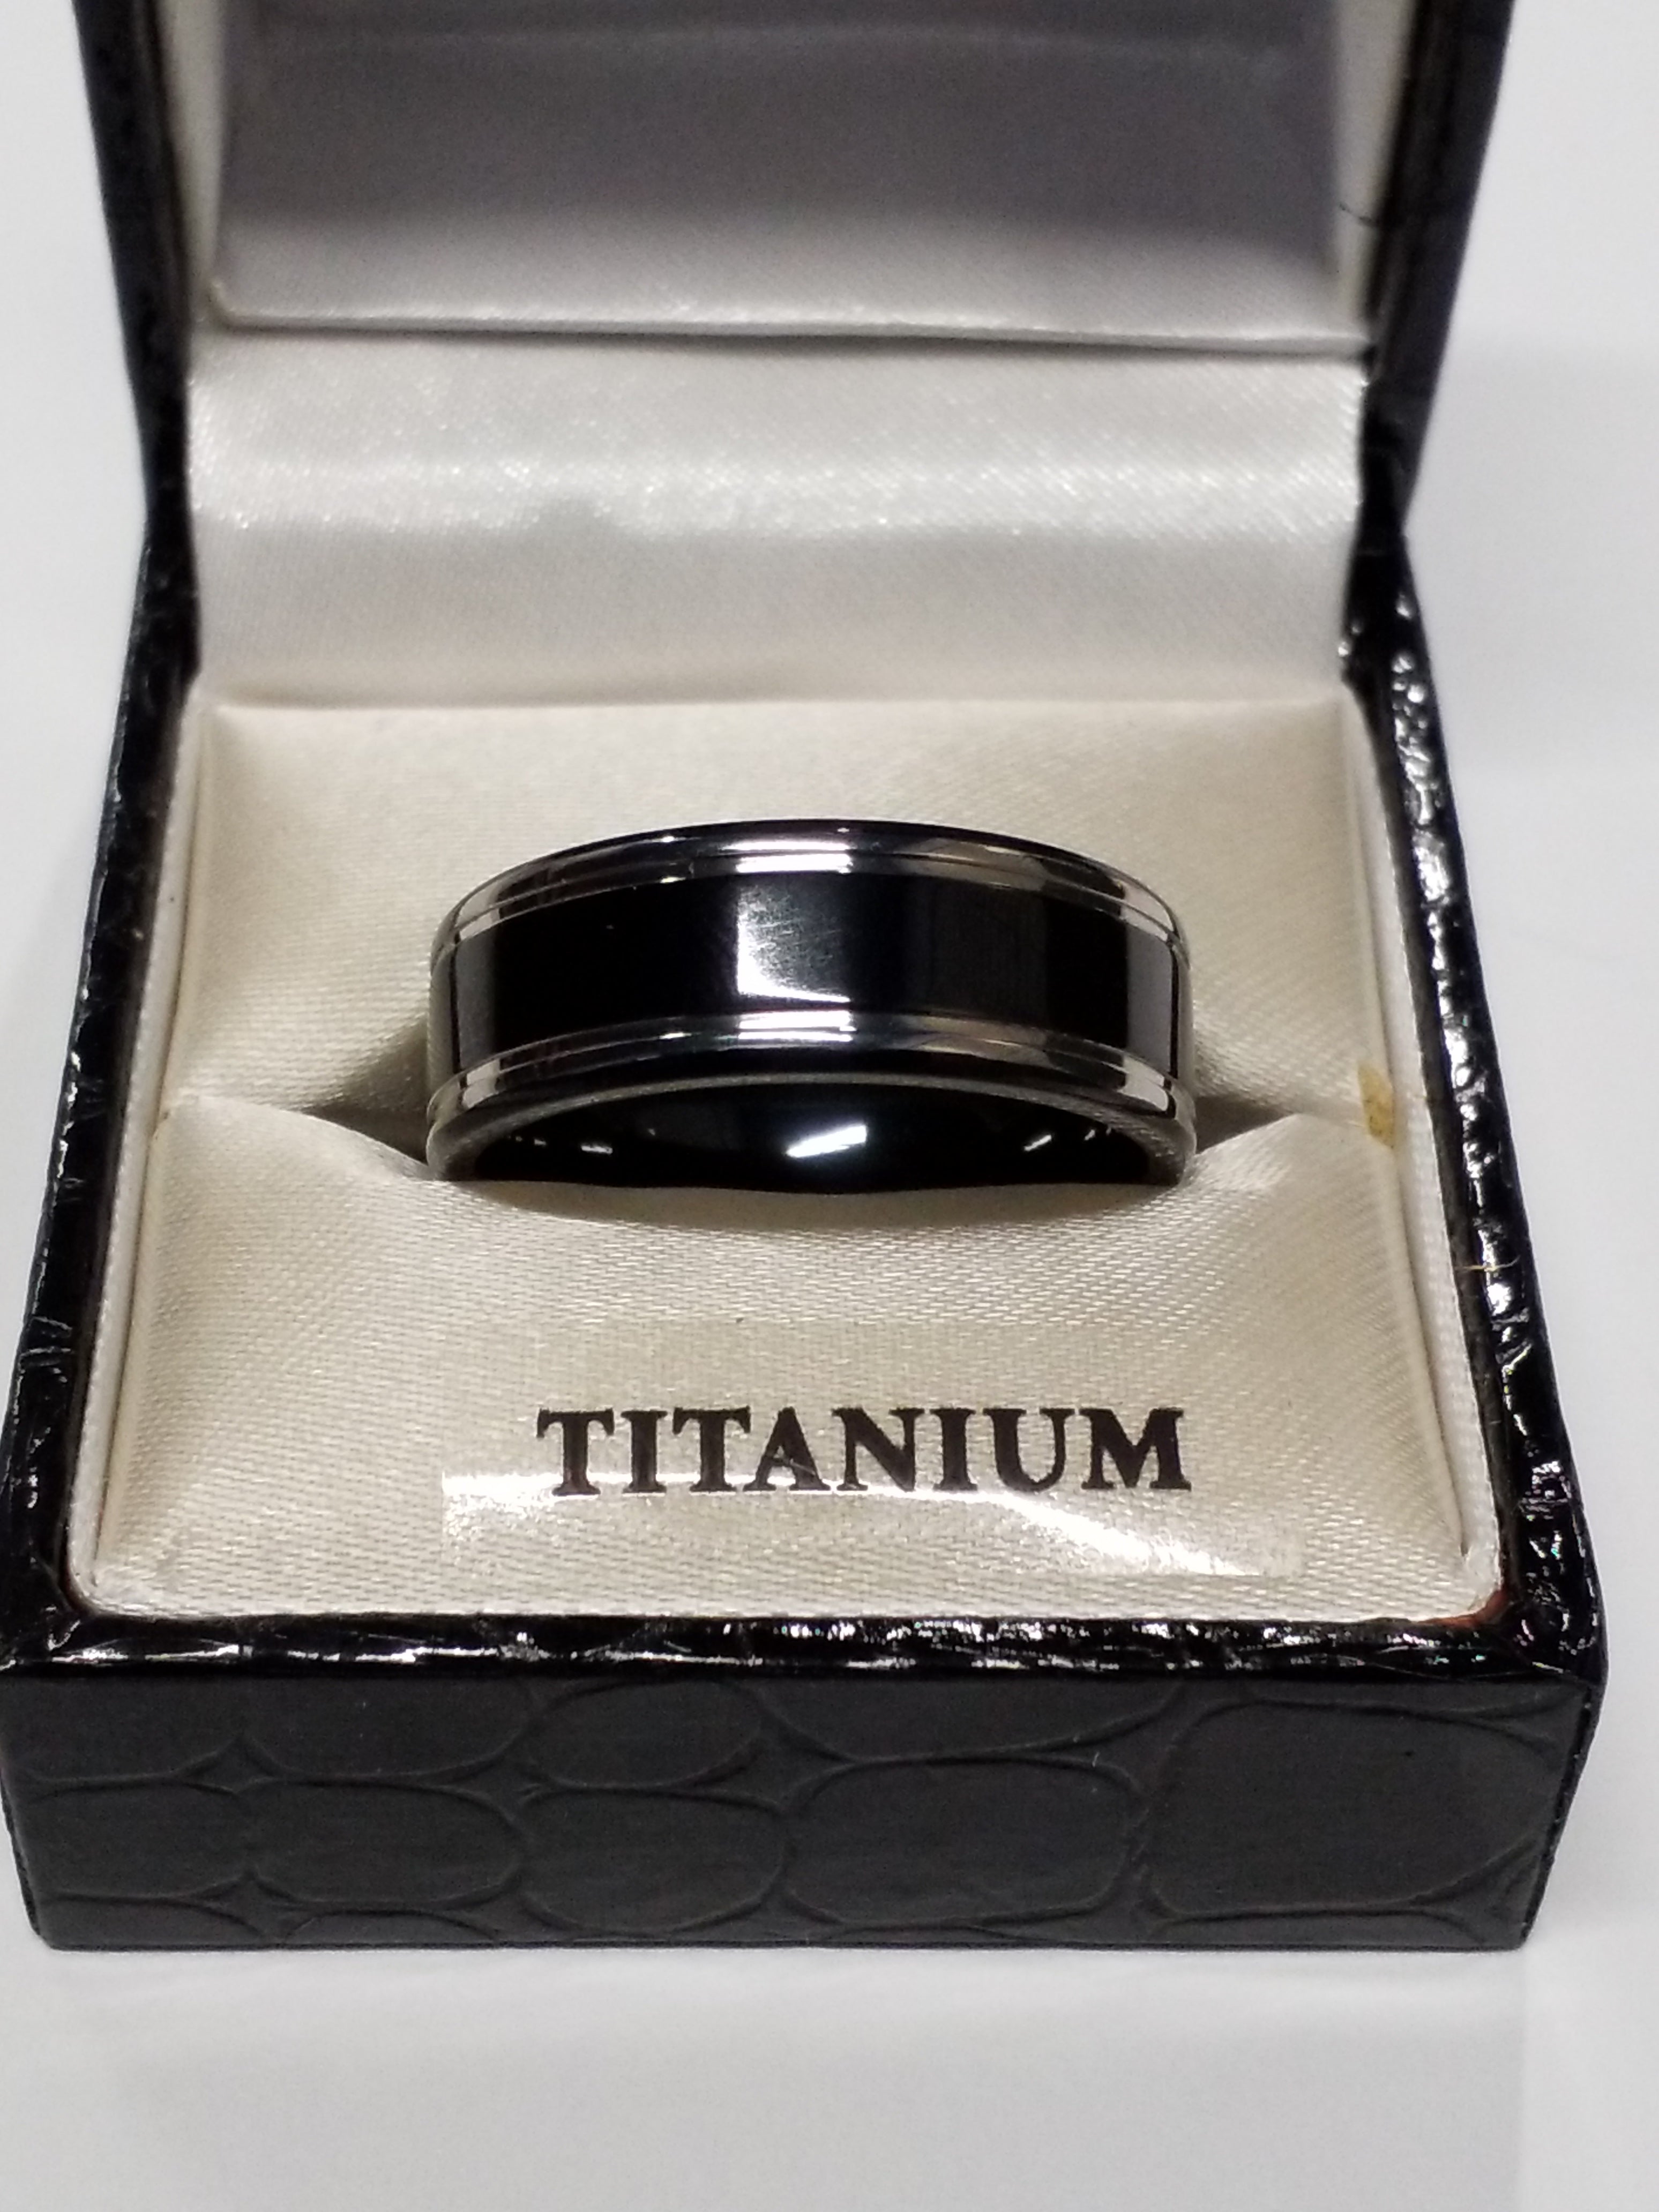 Titanium Band TR51 - Size 10 (Sizes 5 through 14 can be ordered)